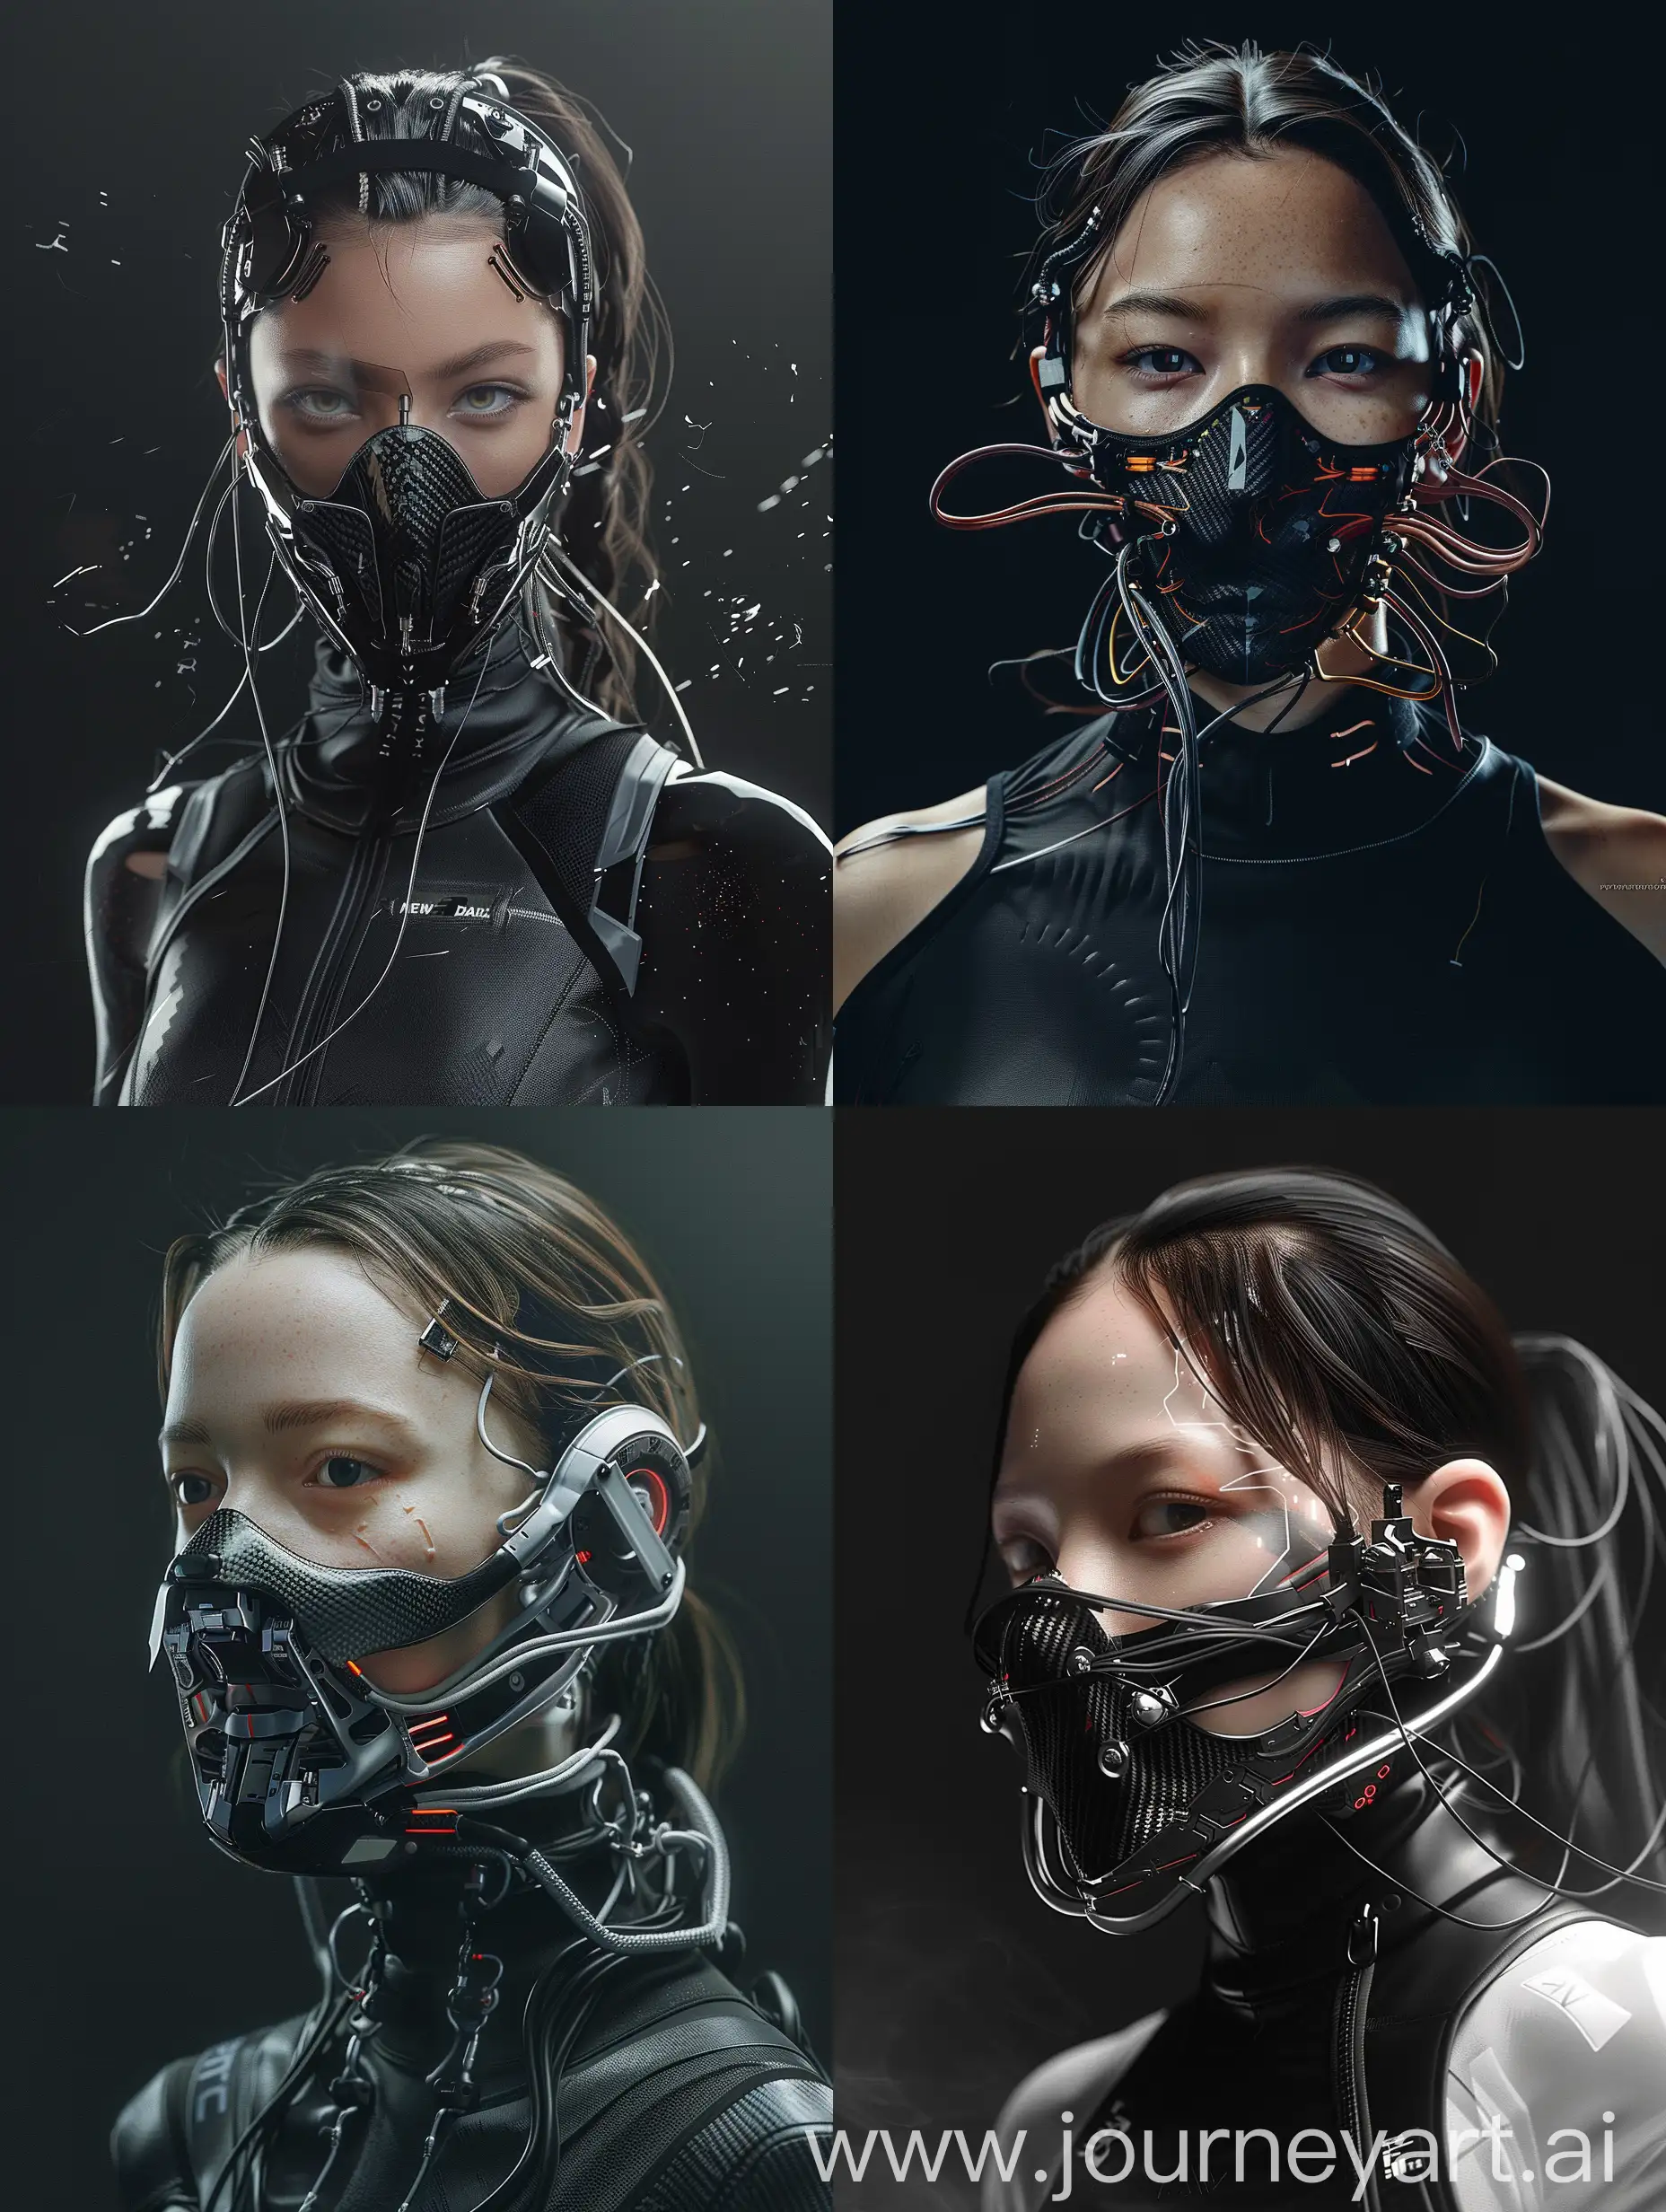 Against a sleek black backdrop, behold the captivating presence of a beautiful character adorned with a cybernetic mouth-covering mask. It seamlessly merges cutting-edge technology with intricate details, showcasing carbon fiber textures, sleek aluminum accents, and pulsating wires. Symbolizing the delicate equilibrium between humanity and machine, her appearance embodies the essence of a futuristic cyberpunk aesthetic, further accentuated by New Balance-inspired add-ons. With dynamic movements reminiscent of action-packed film sequences, accompanied by cinematic haze and an electric energy, she exudes an irresistible allure that commands attention. Enhanced with adjustments in brightness and contrast, meticulous attention to levels, and carefully crafted shadows, her image comes to life with mesmerizing depth and intensity.